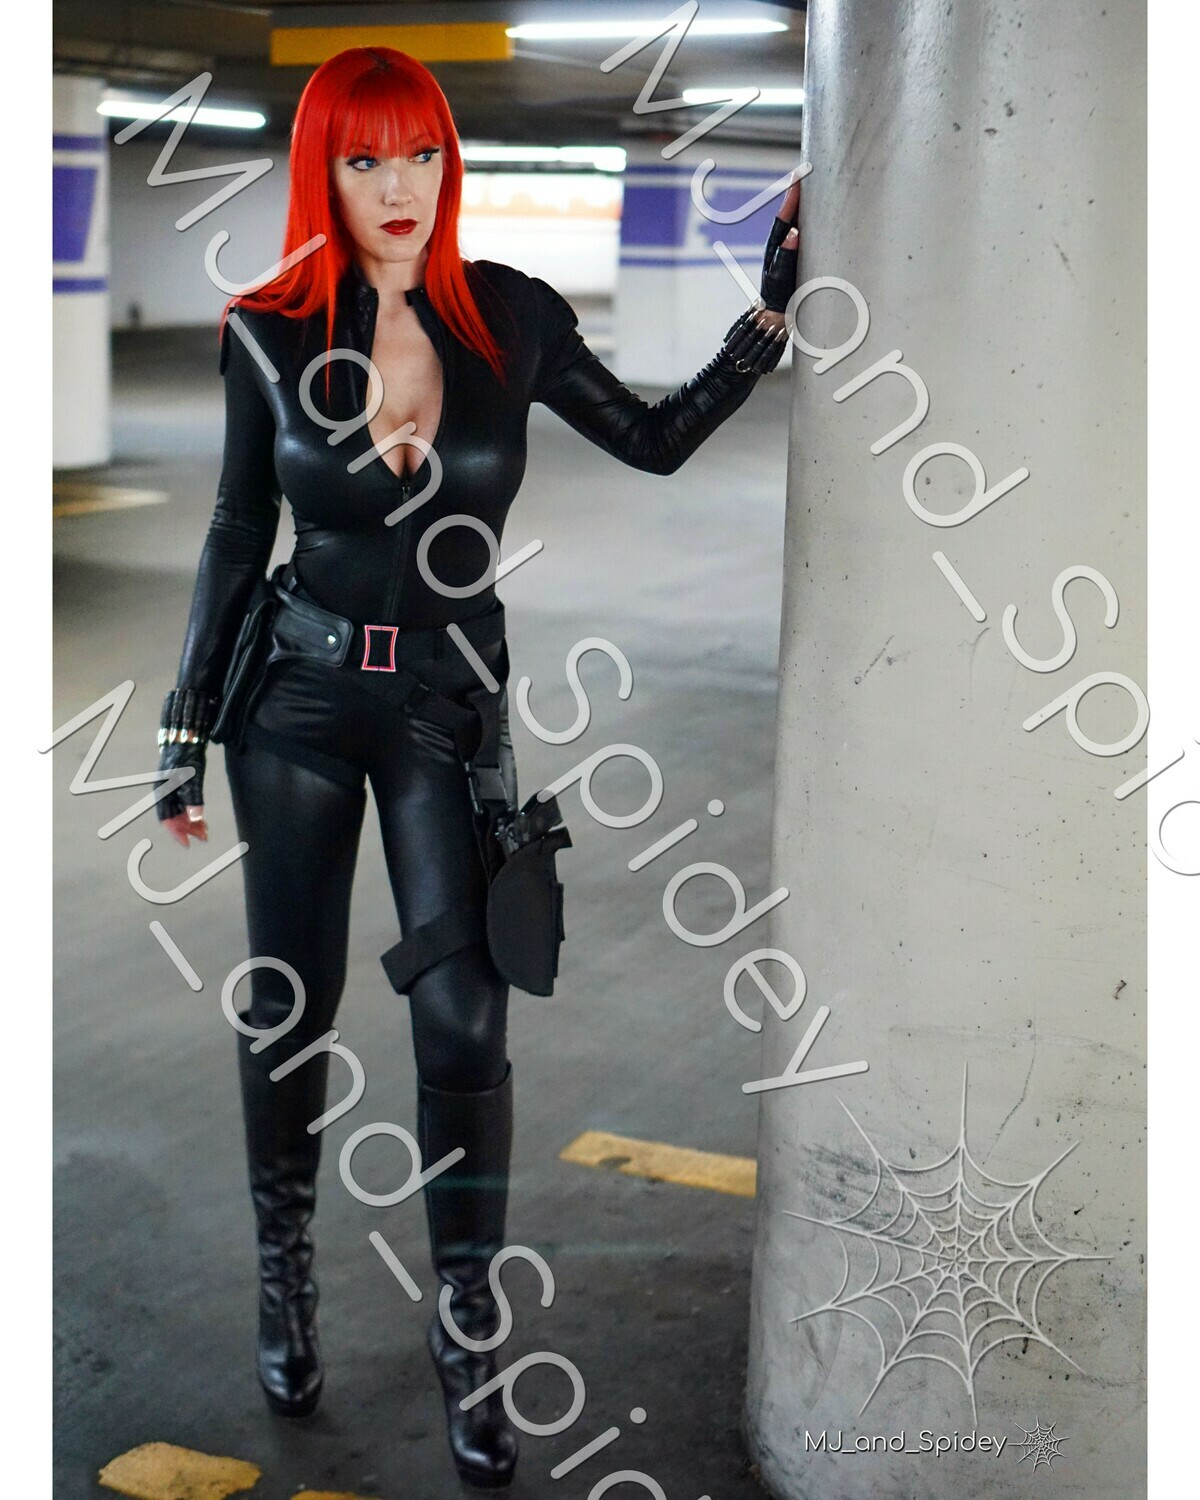 Marvel - Avengers - Black Widow 6 - Digital Cosplay Image (@MJ_and_Spidey, MJ and Spidey, Comics)